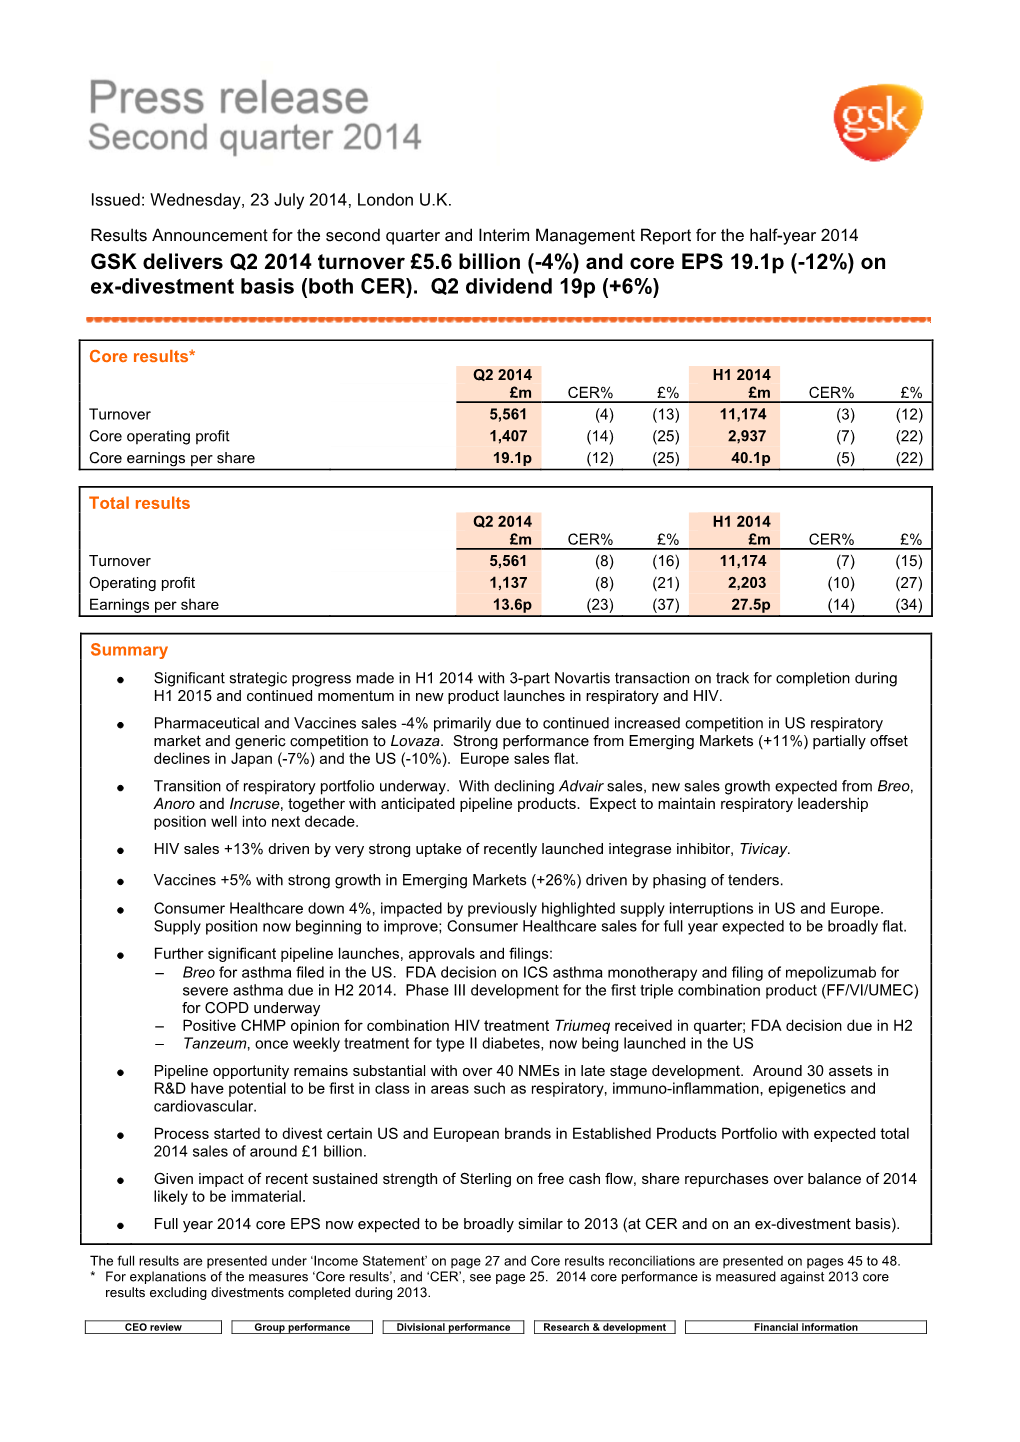 GSK Delivers Q2 2014 Turnover £5.6 Billion (-4%) and Core EPS 19.1P (-12%) on Ex-Divestment Basis (Both CER)